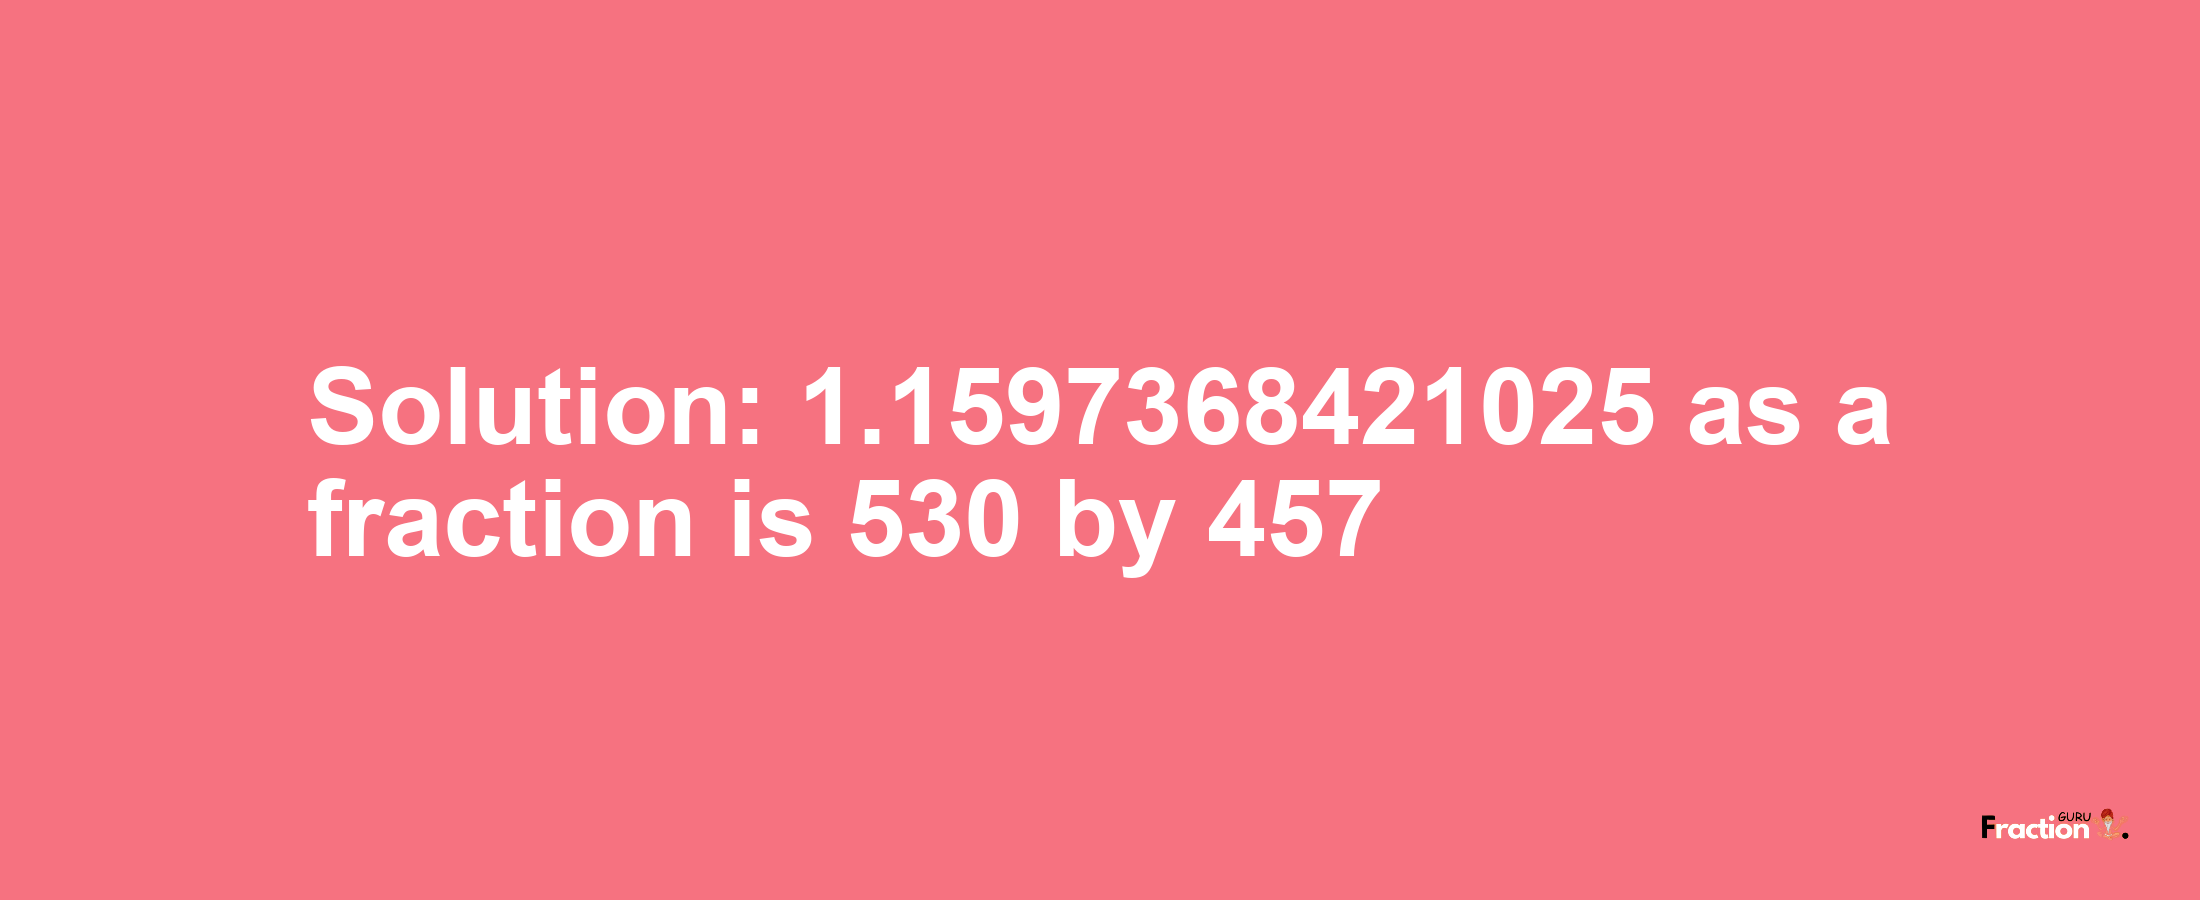 Solution:1.1597368421025 as a fraction is 530/457